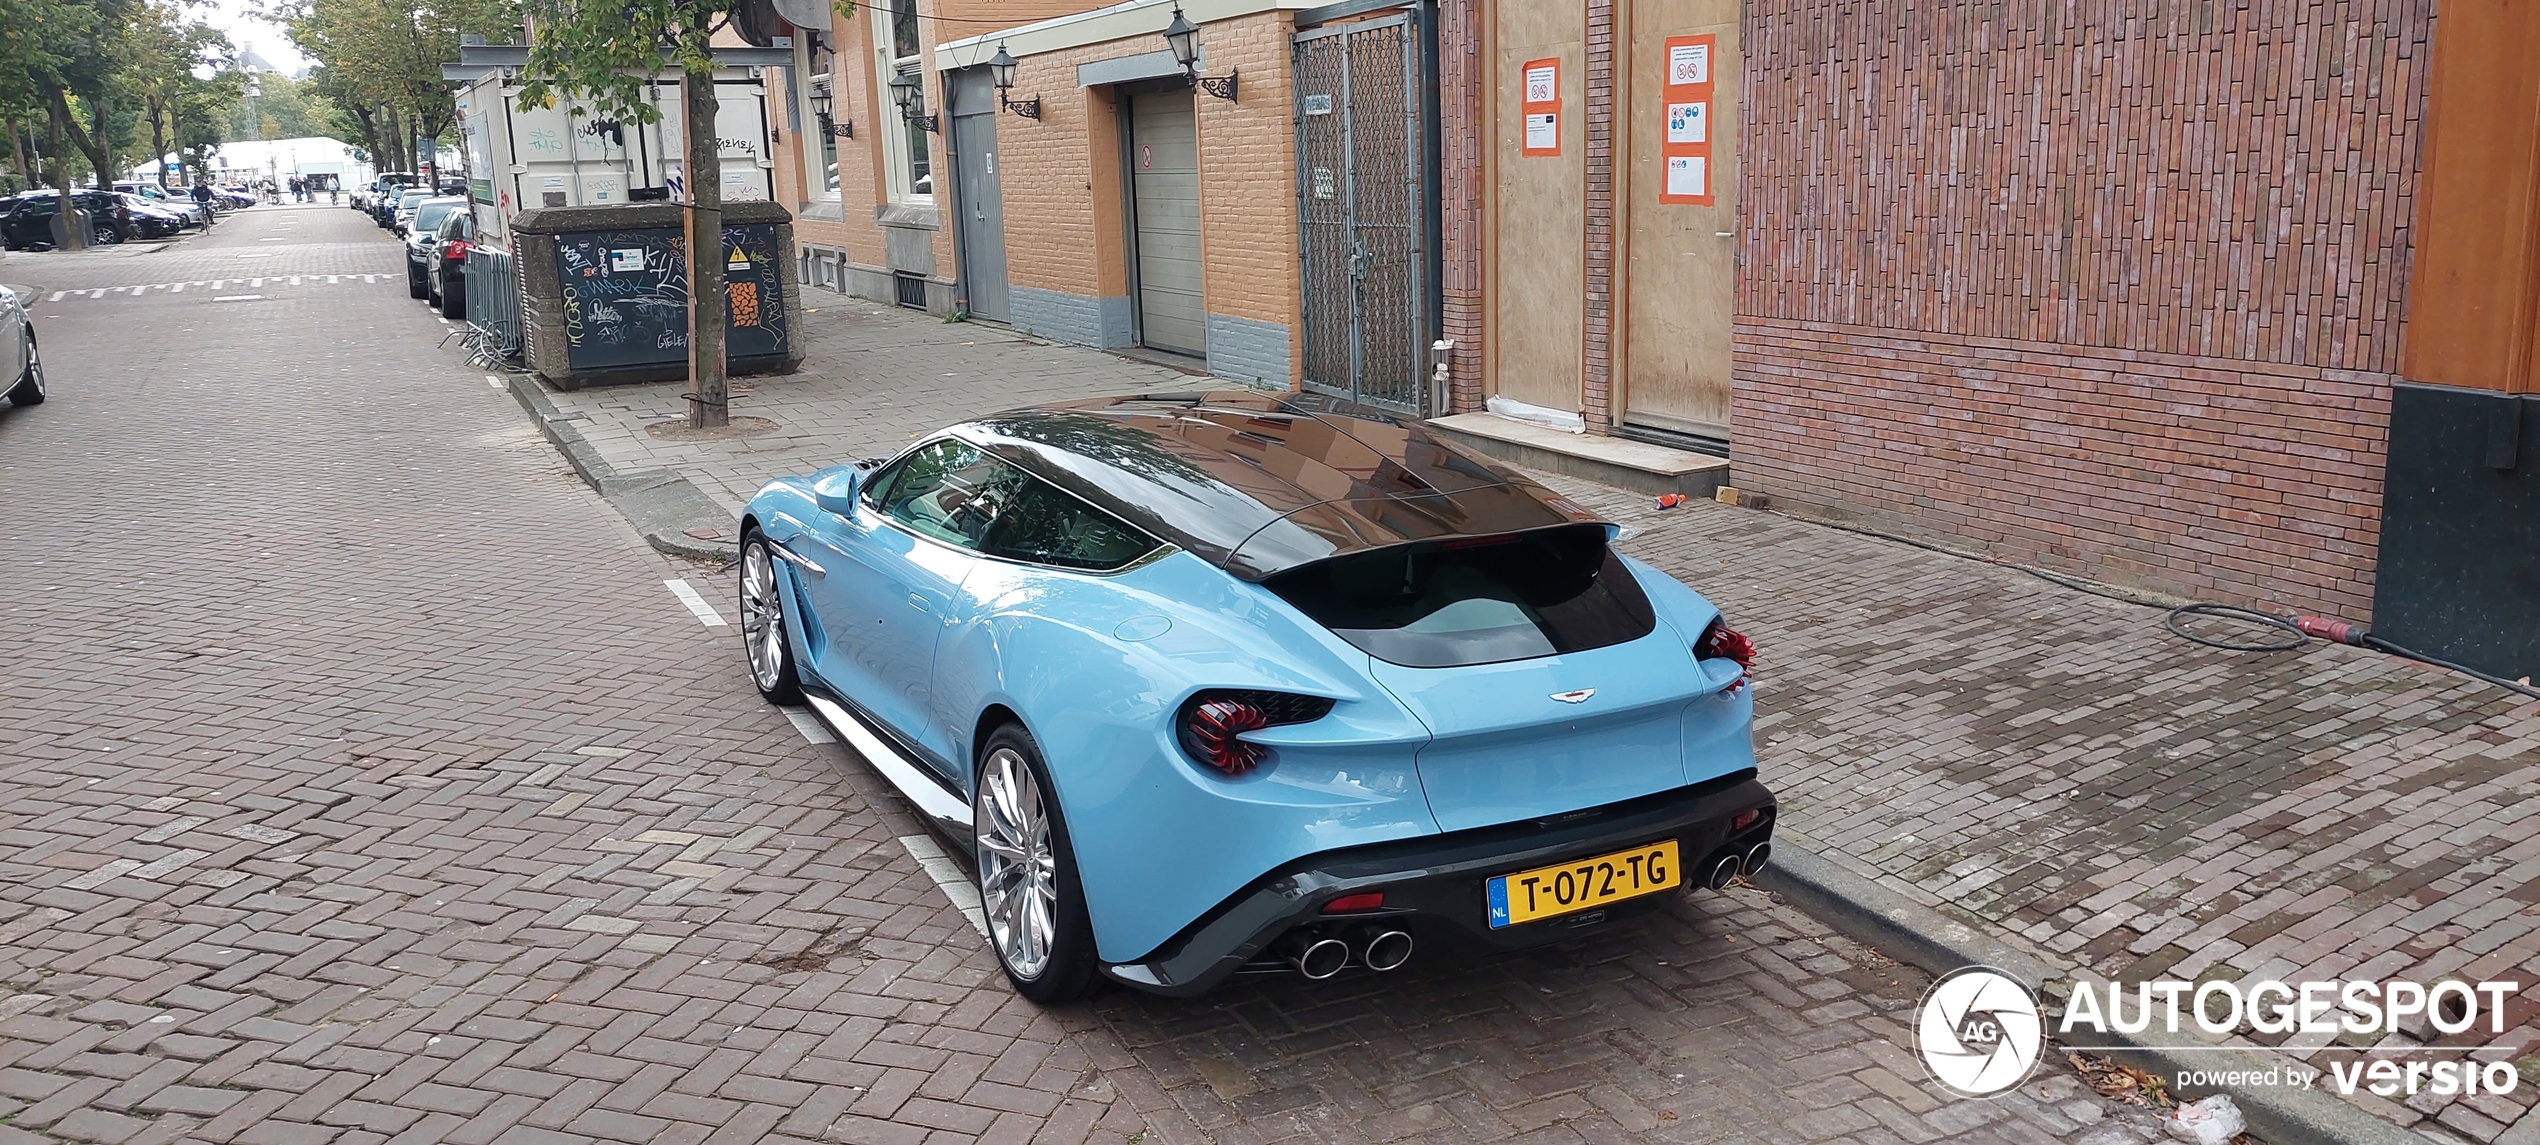 The most beautiful Vanquish Zagato Shooting Brake is now on the road with Dutch license plates.